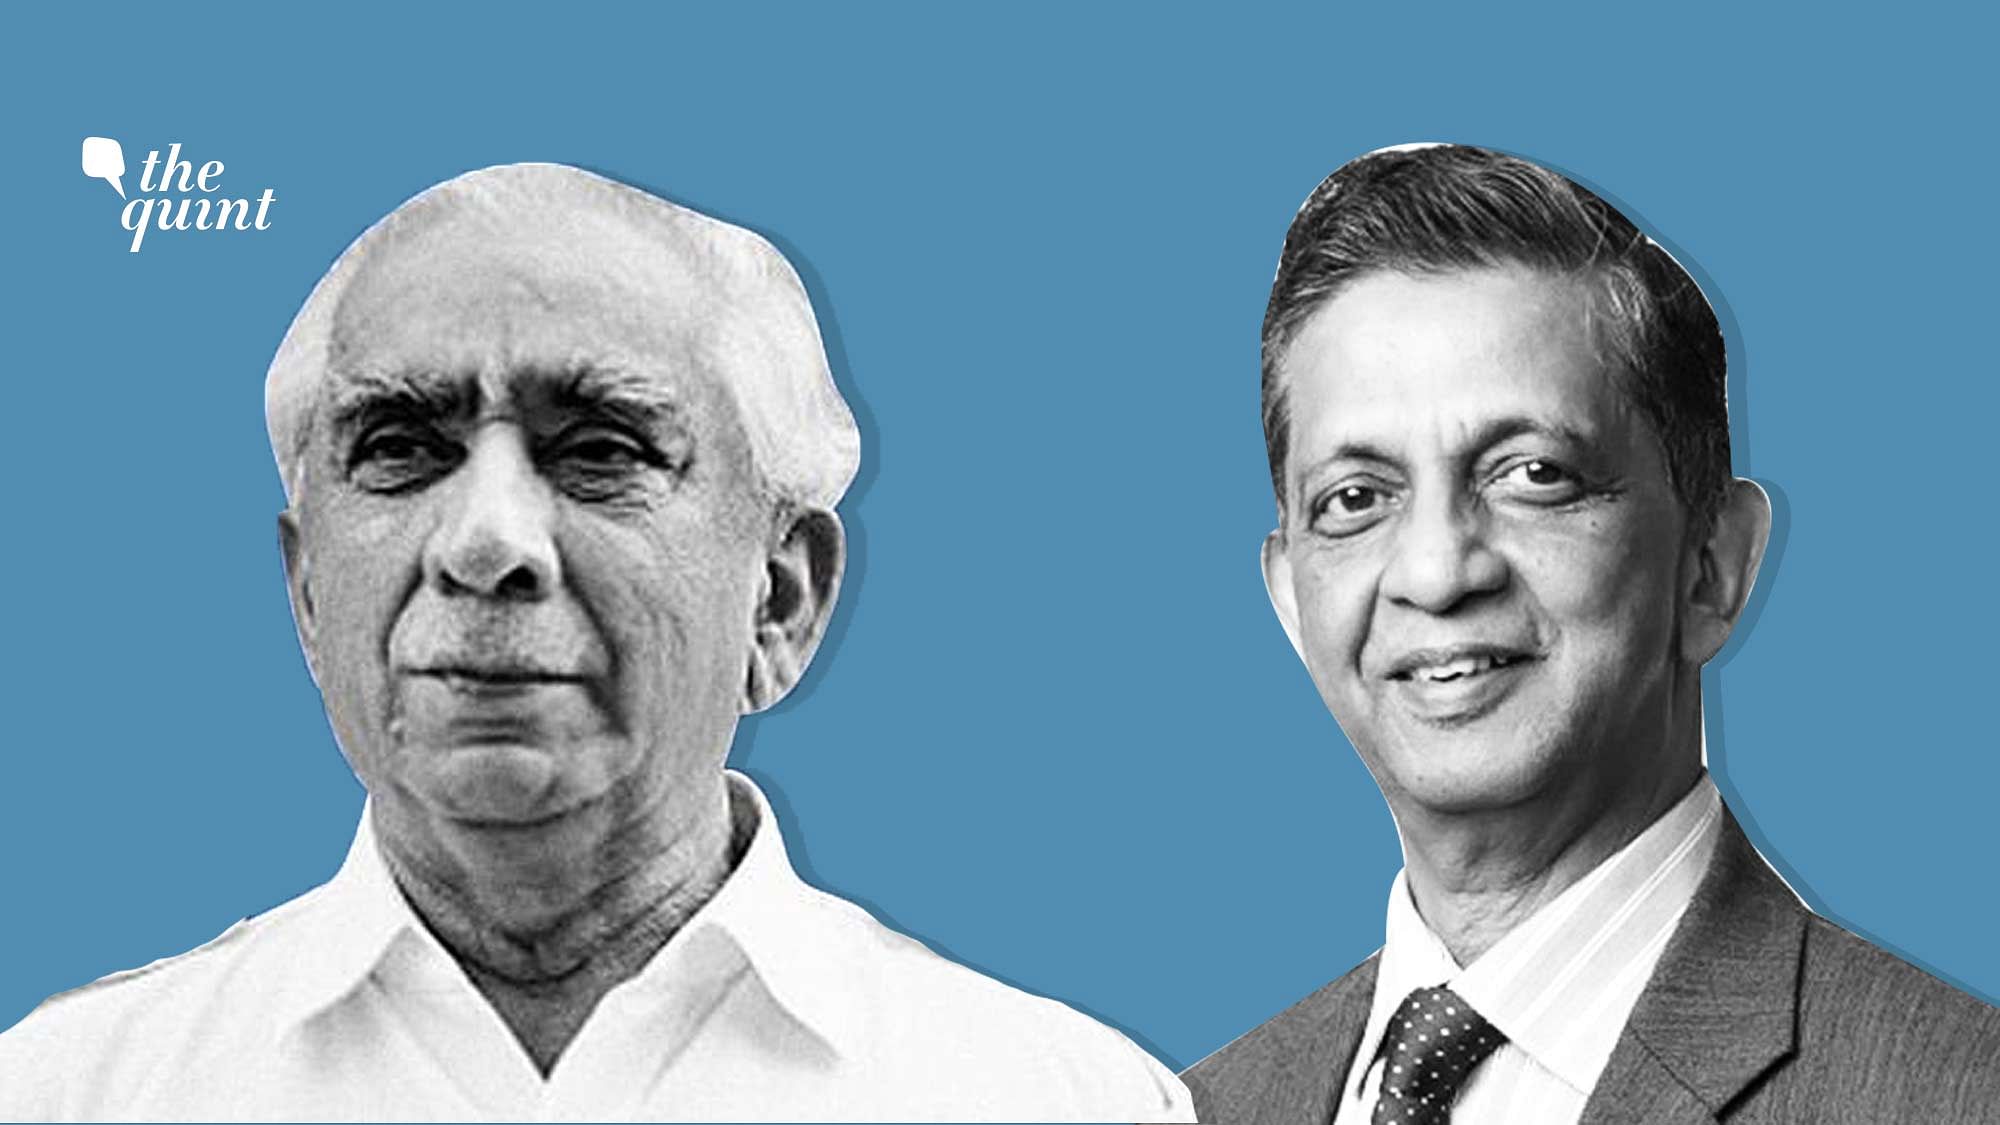 Jaswant Singh (L) and Dr S Narayan (R). Image used for representational purposes.